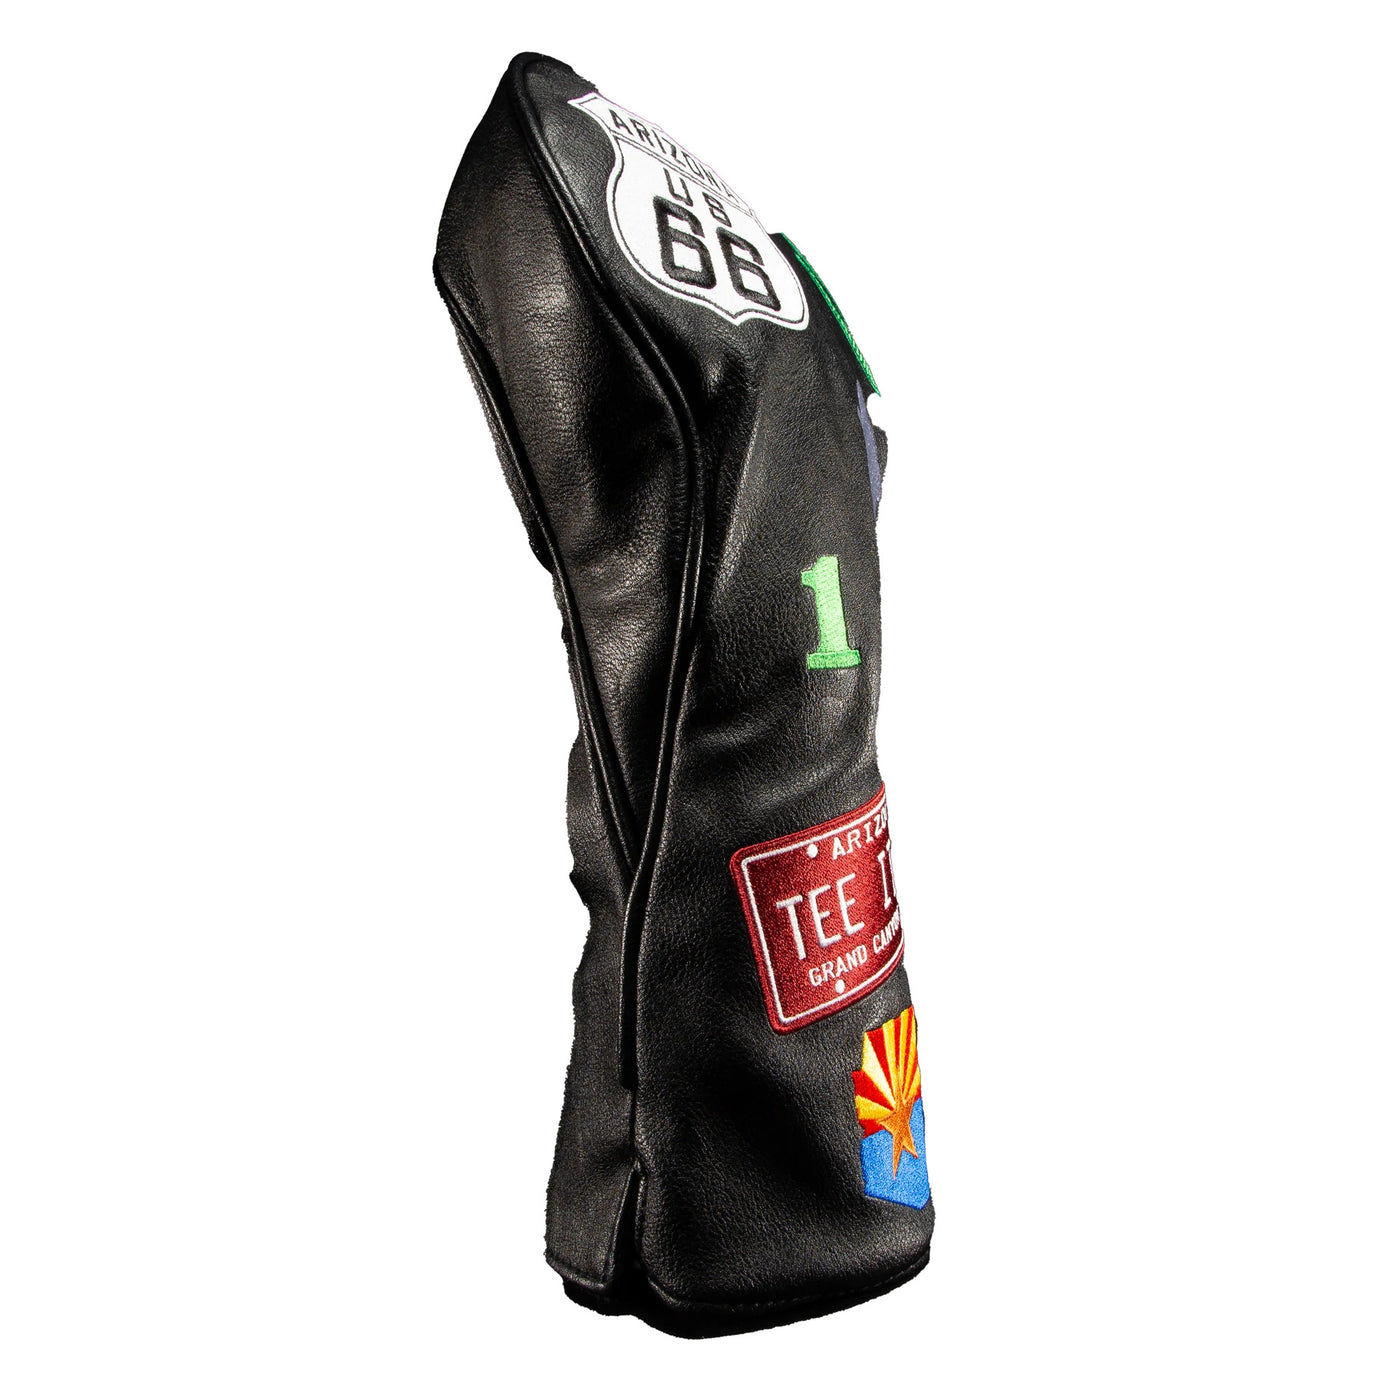 Southwestern Driver Headcover